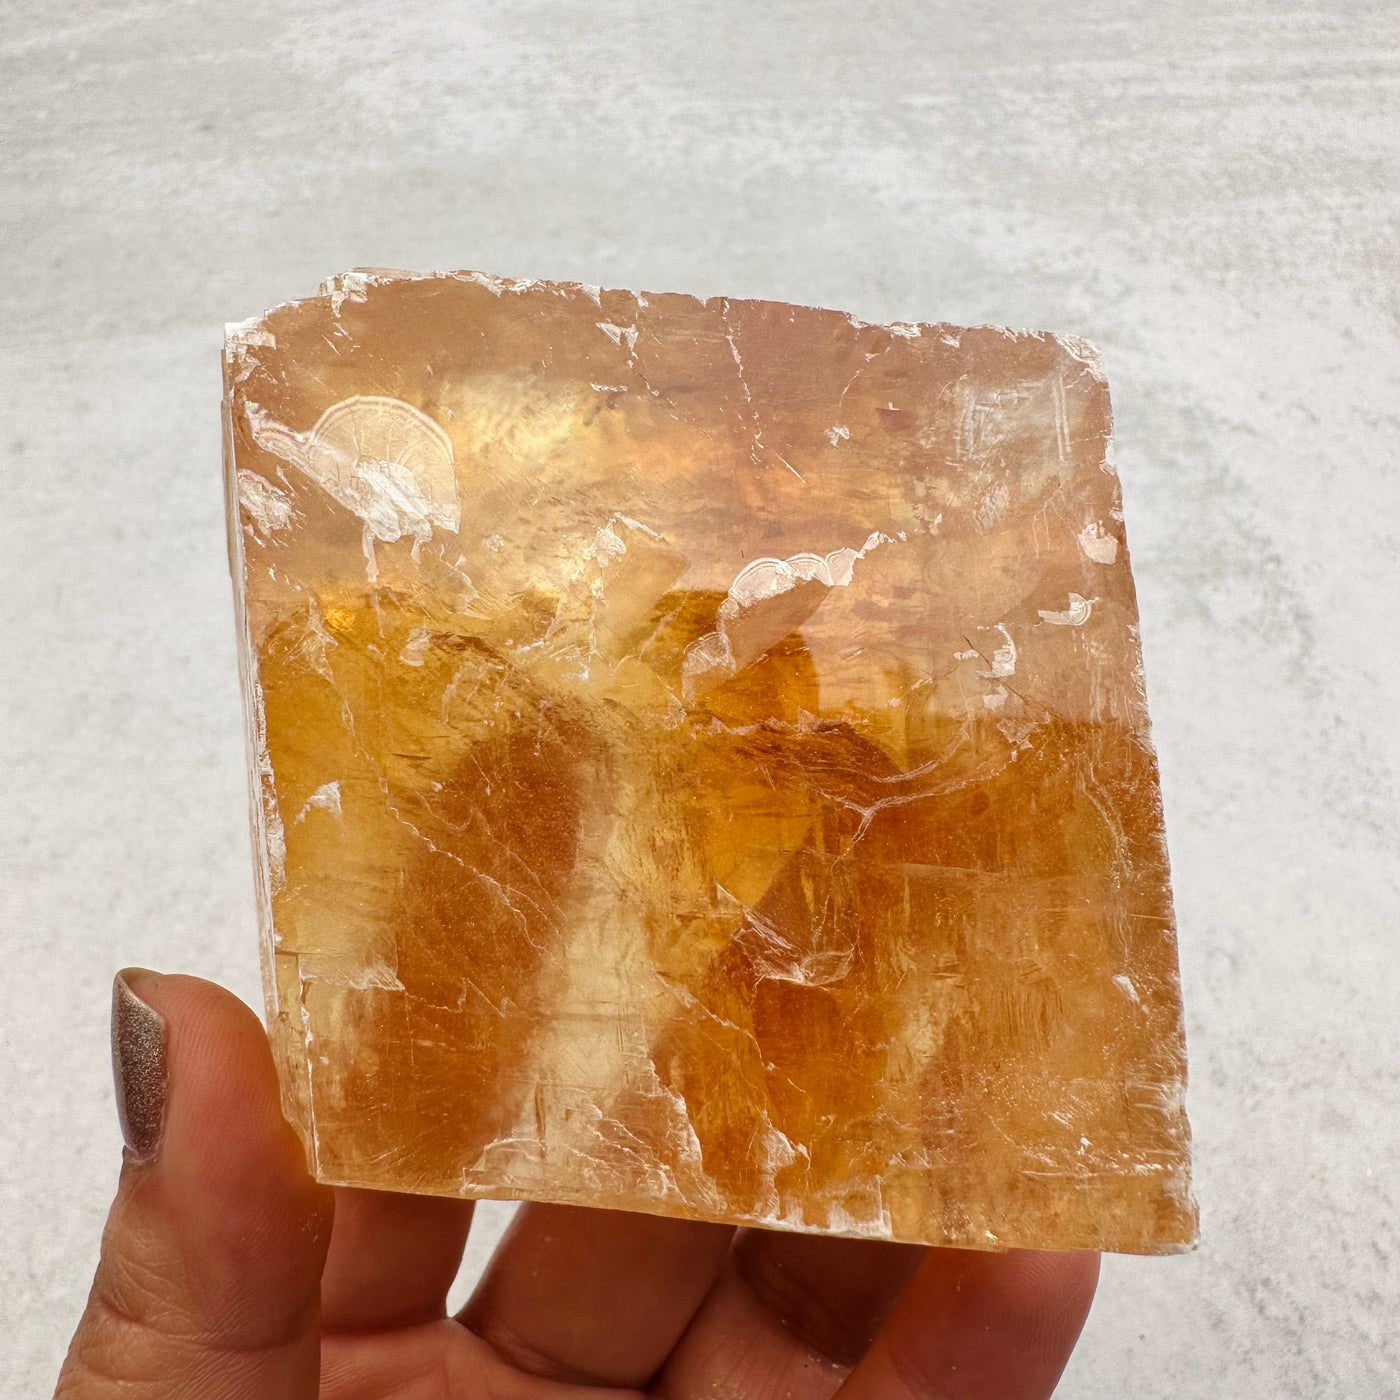 calcite piece in hand for size reference